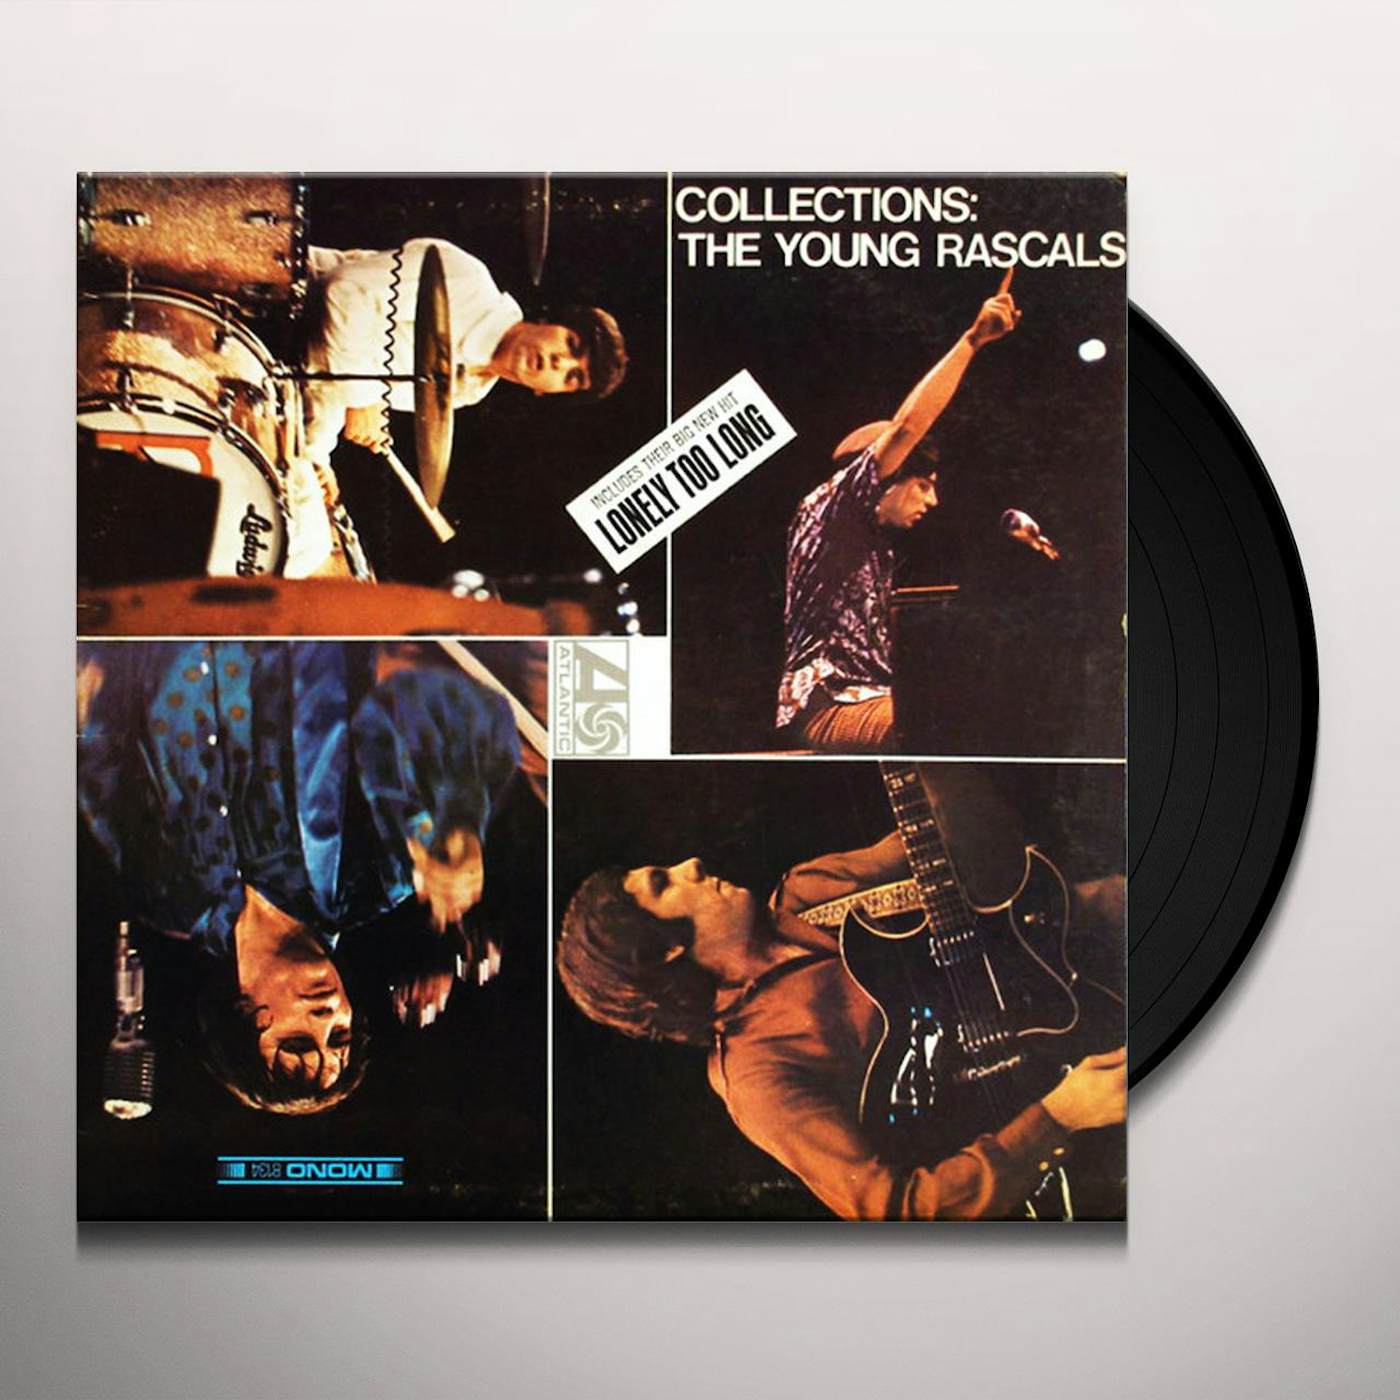 The Young Rascals COLLECTIONS Vinyl Record